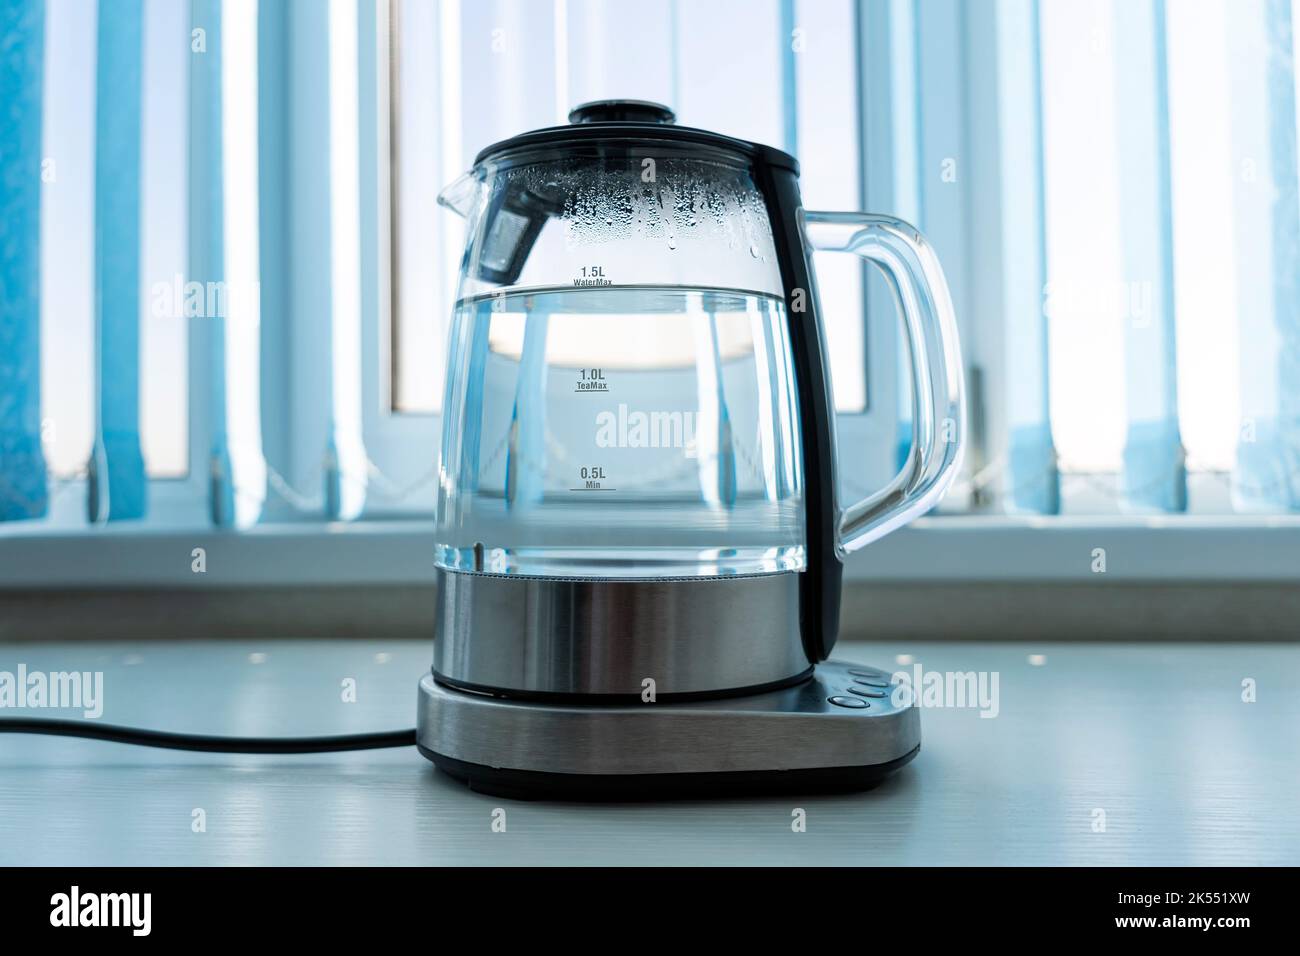 Breville The Crystal Clear Electric Kettle